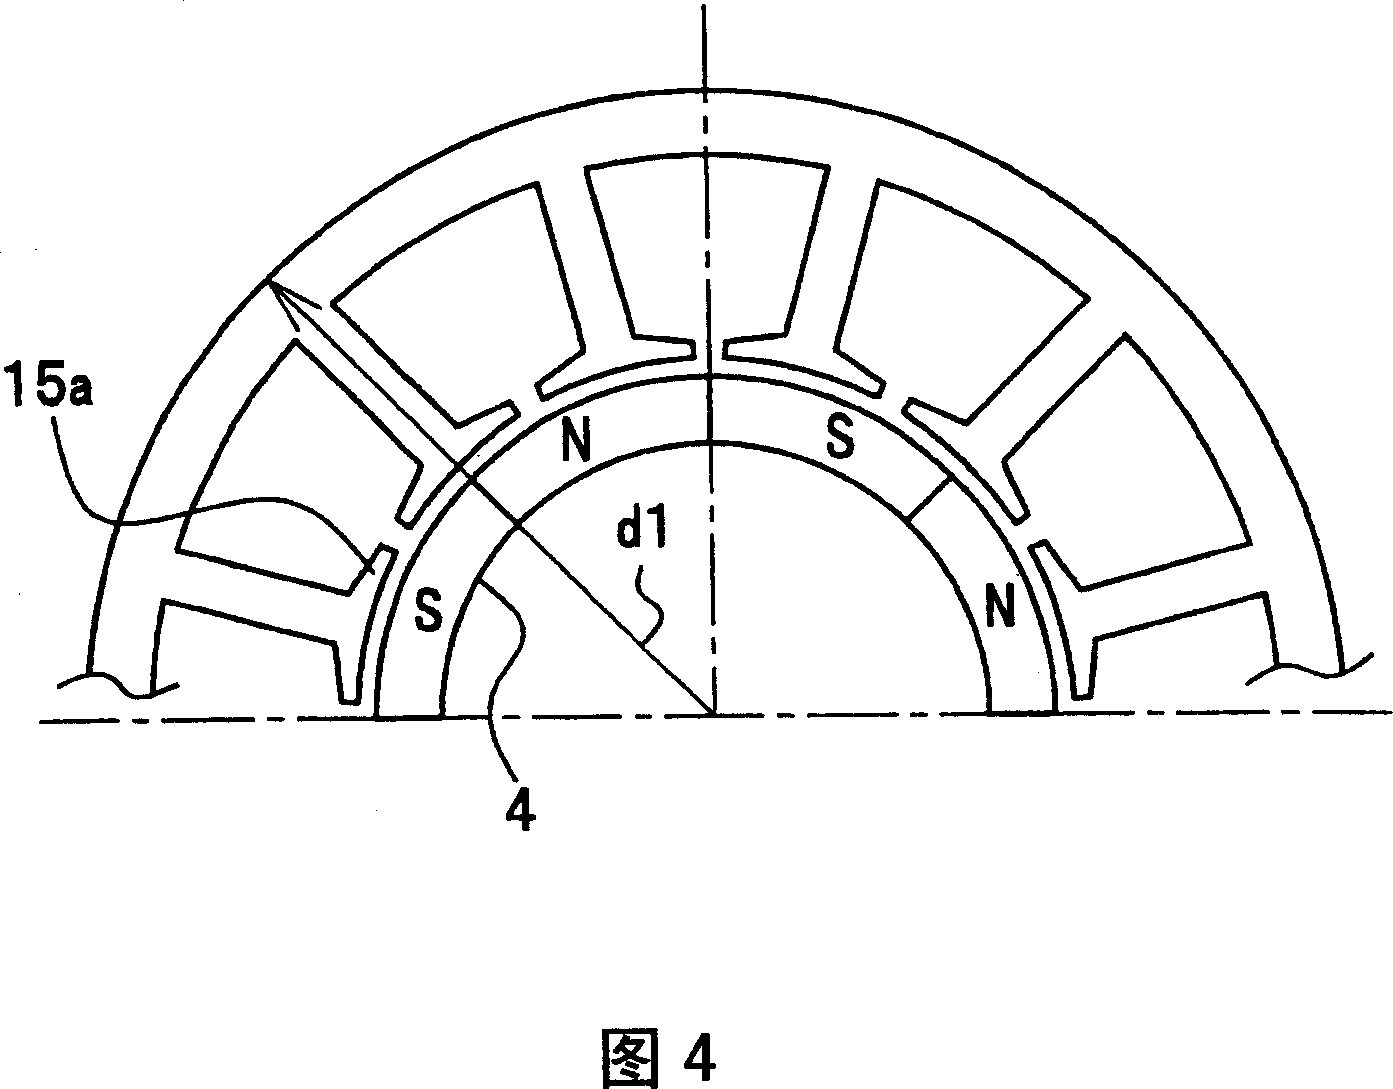 A rotating electrical machine with a transmission and a driving apparatus using the same